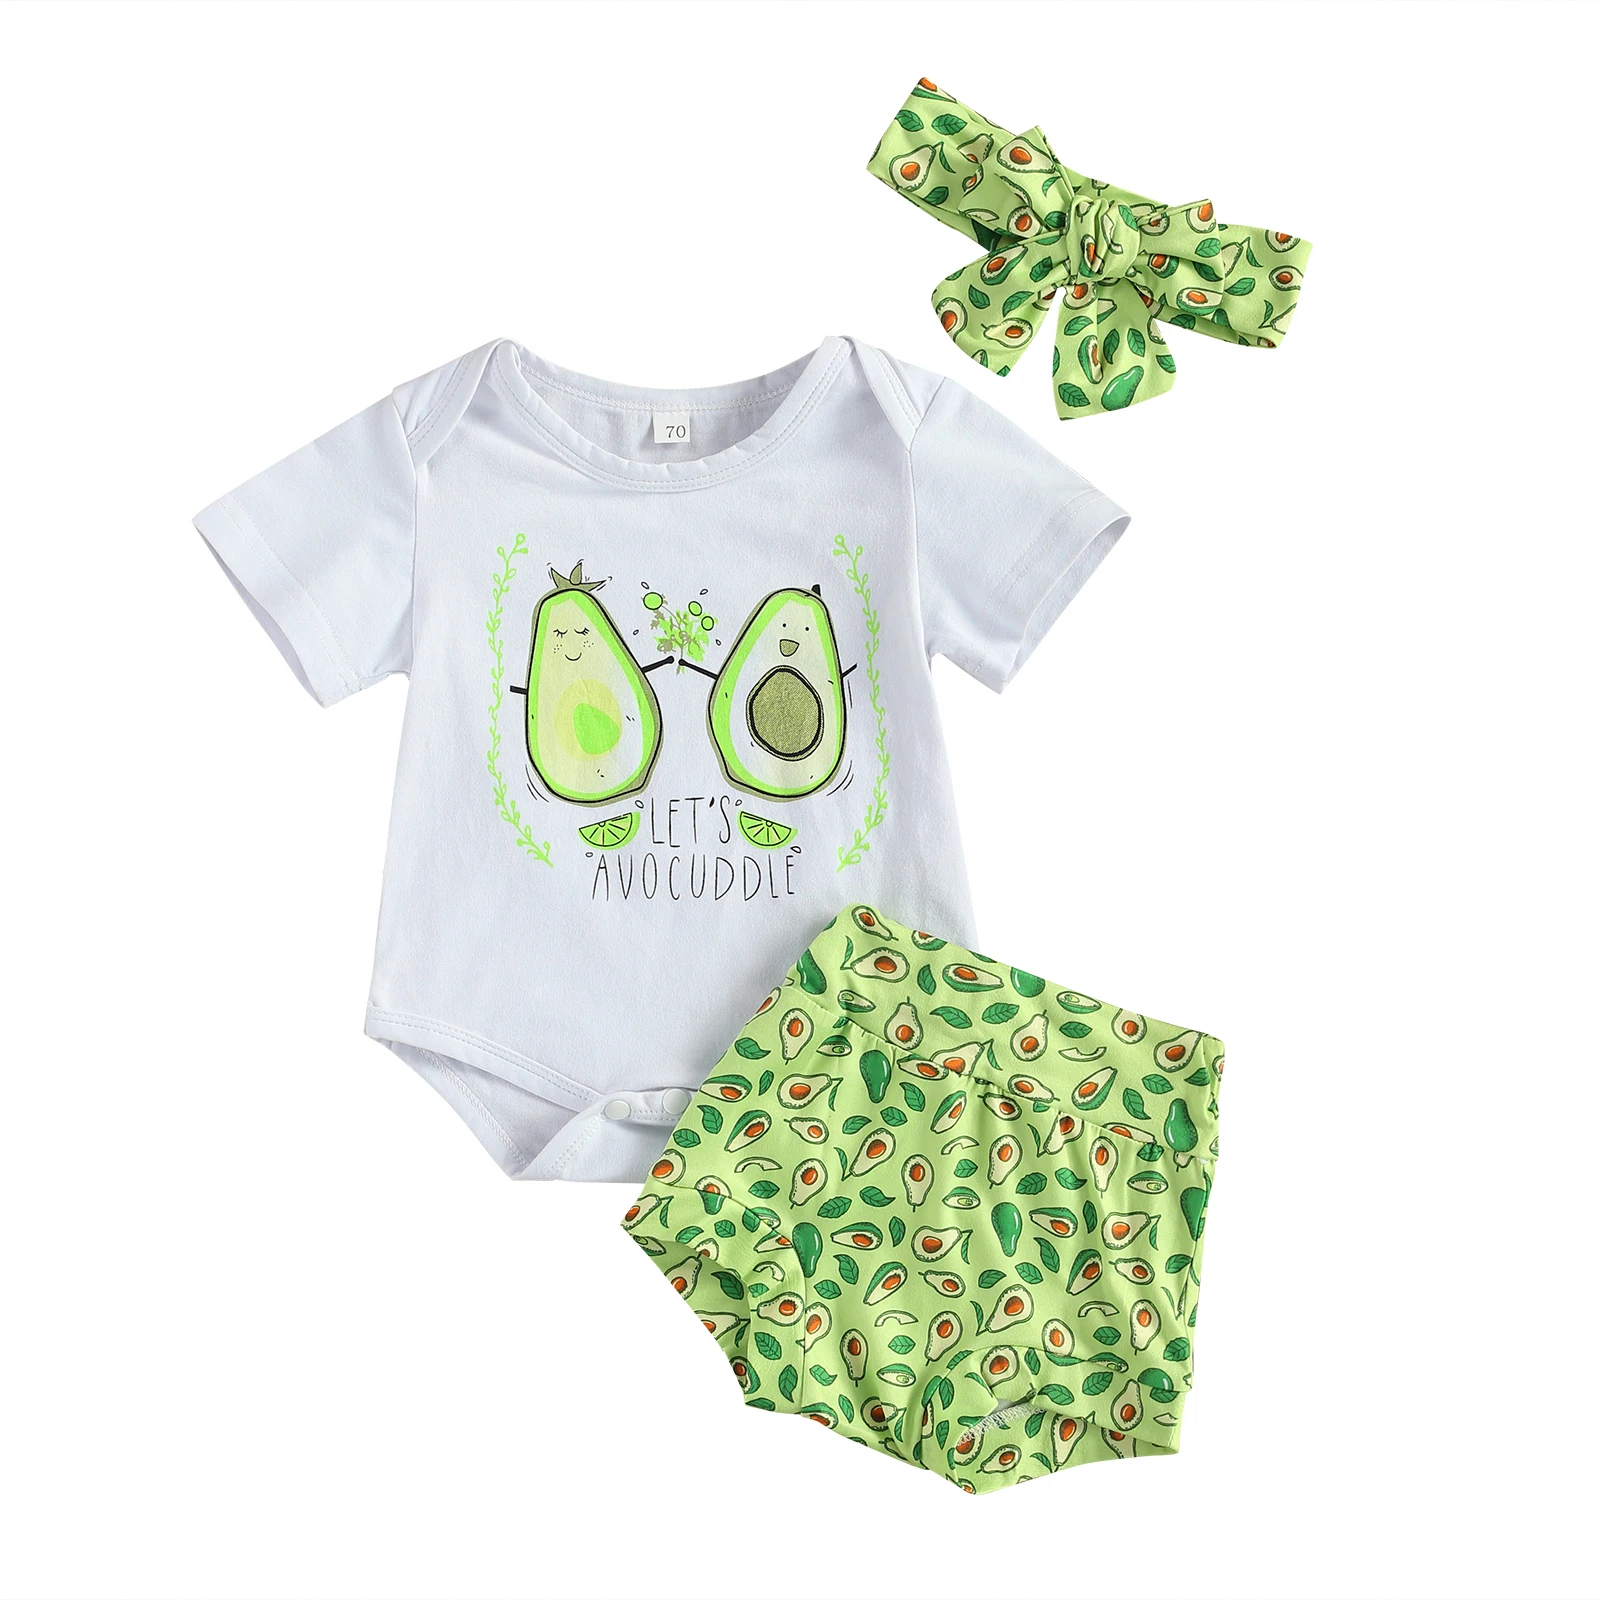 Ma&Baby 0-18M Summer Baby Girl Clothes Set Newborn Infant Avocado Print Outfits Romper Shorts Toddler Girl Costumes DD15 stylish baby clothing set